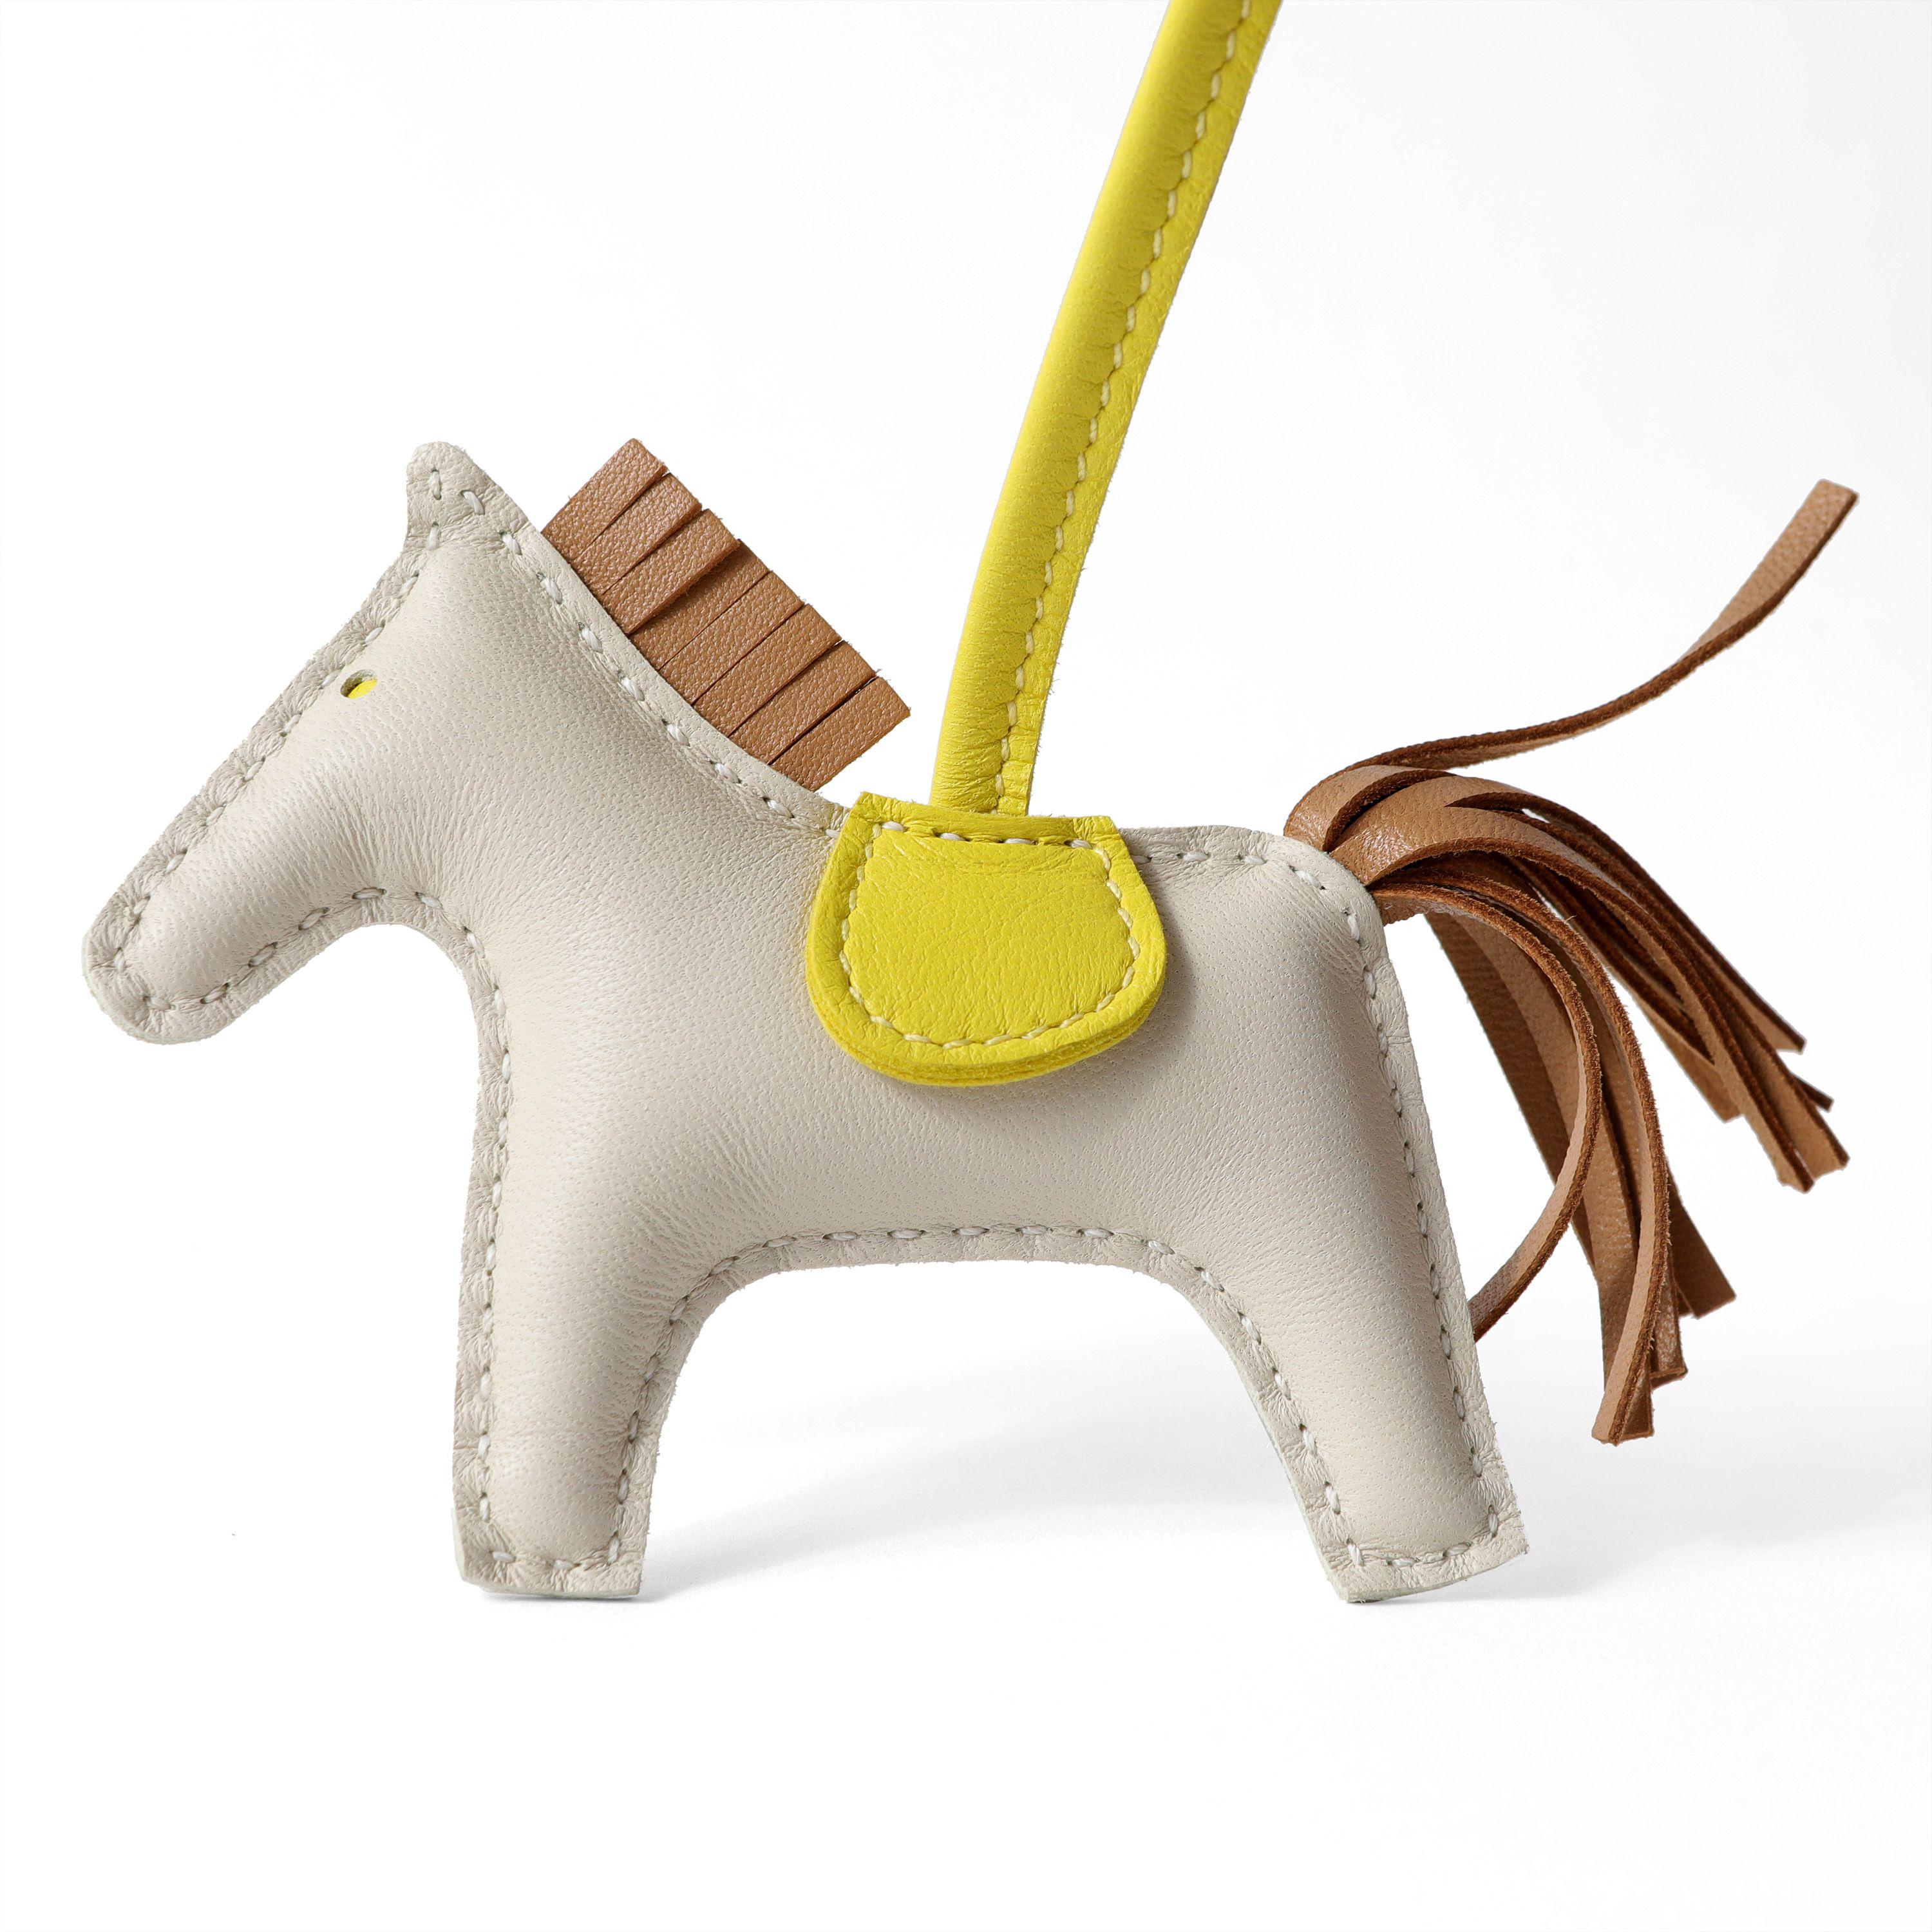 This authentic Hermès Rodeo Bag Charm is in pristine condition. Craie, Biscuit and Lemon. Box included.

PBF 13176